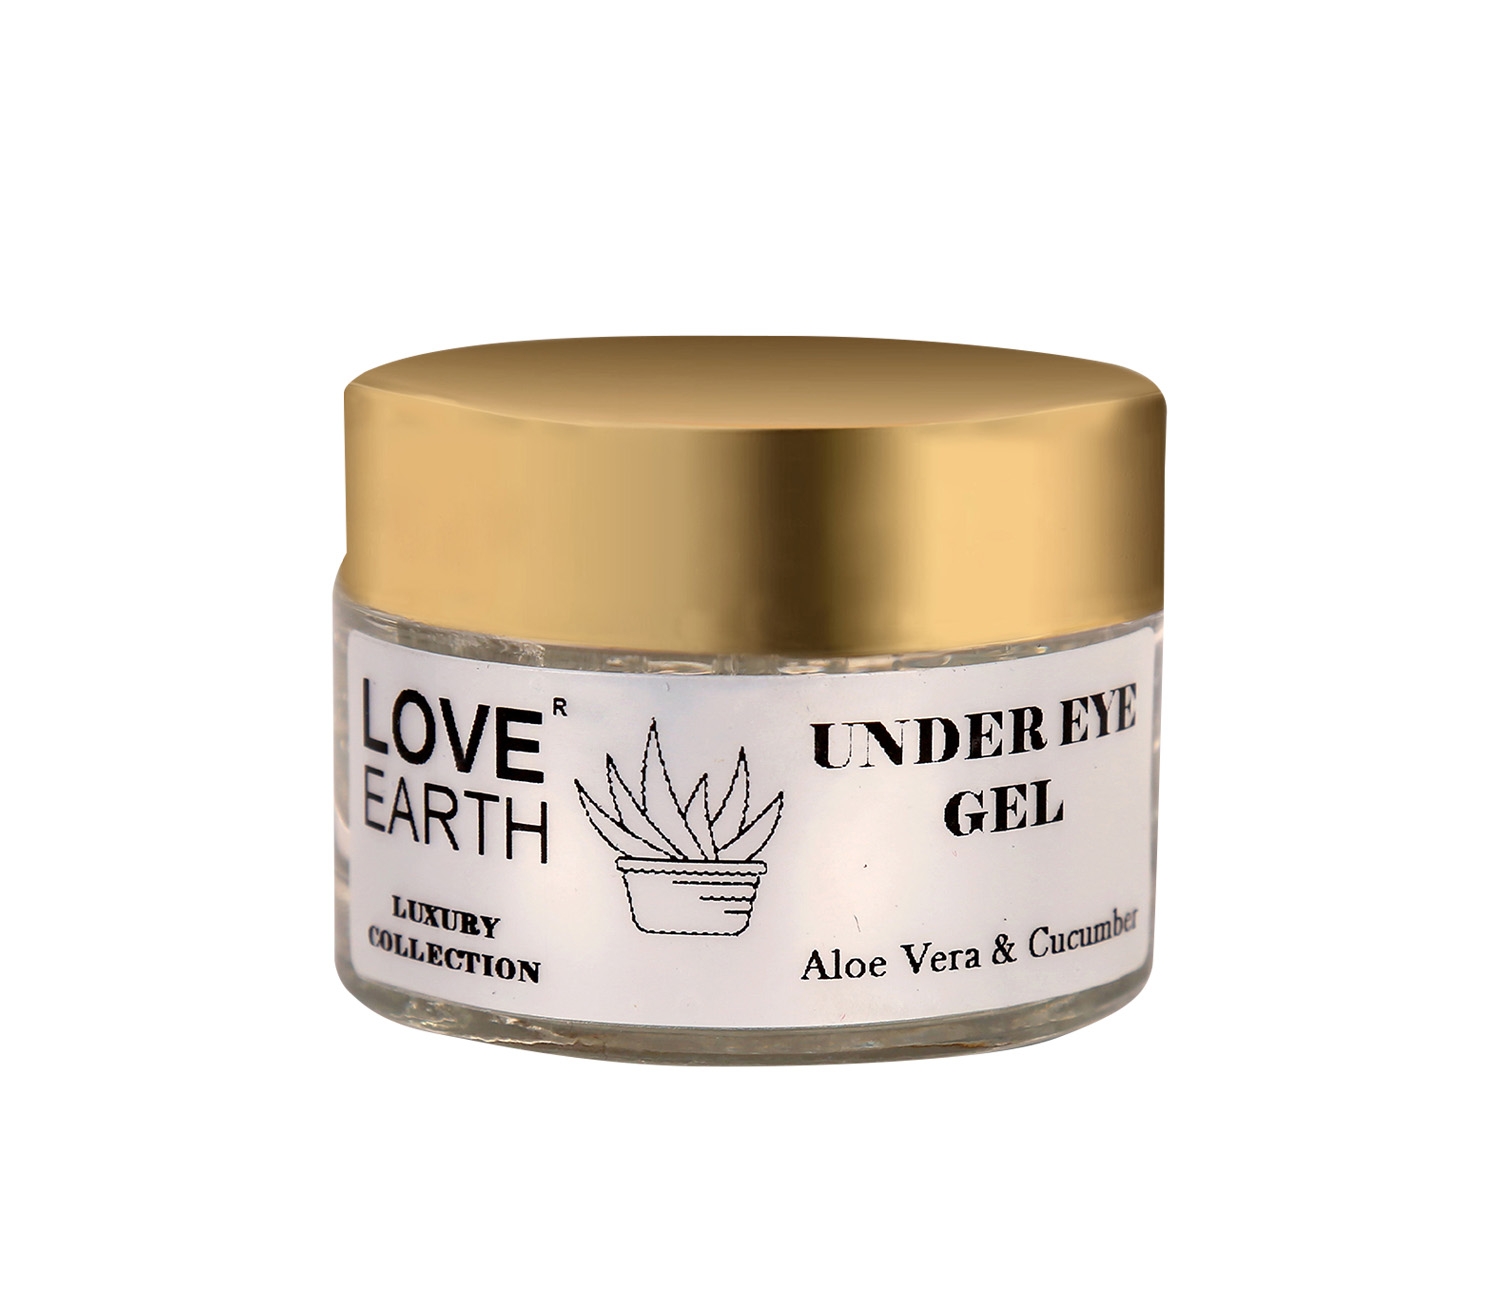 LOVE EARTH | Love Earth Organic Under Eye Gel with Aloe Vera & Cucumber Extracts Reduces Dark Circles, Puffiness and Fine Lines 50gm